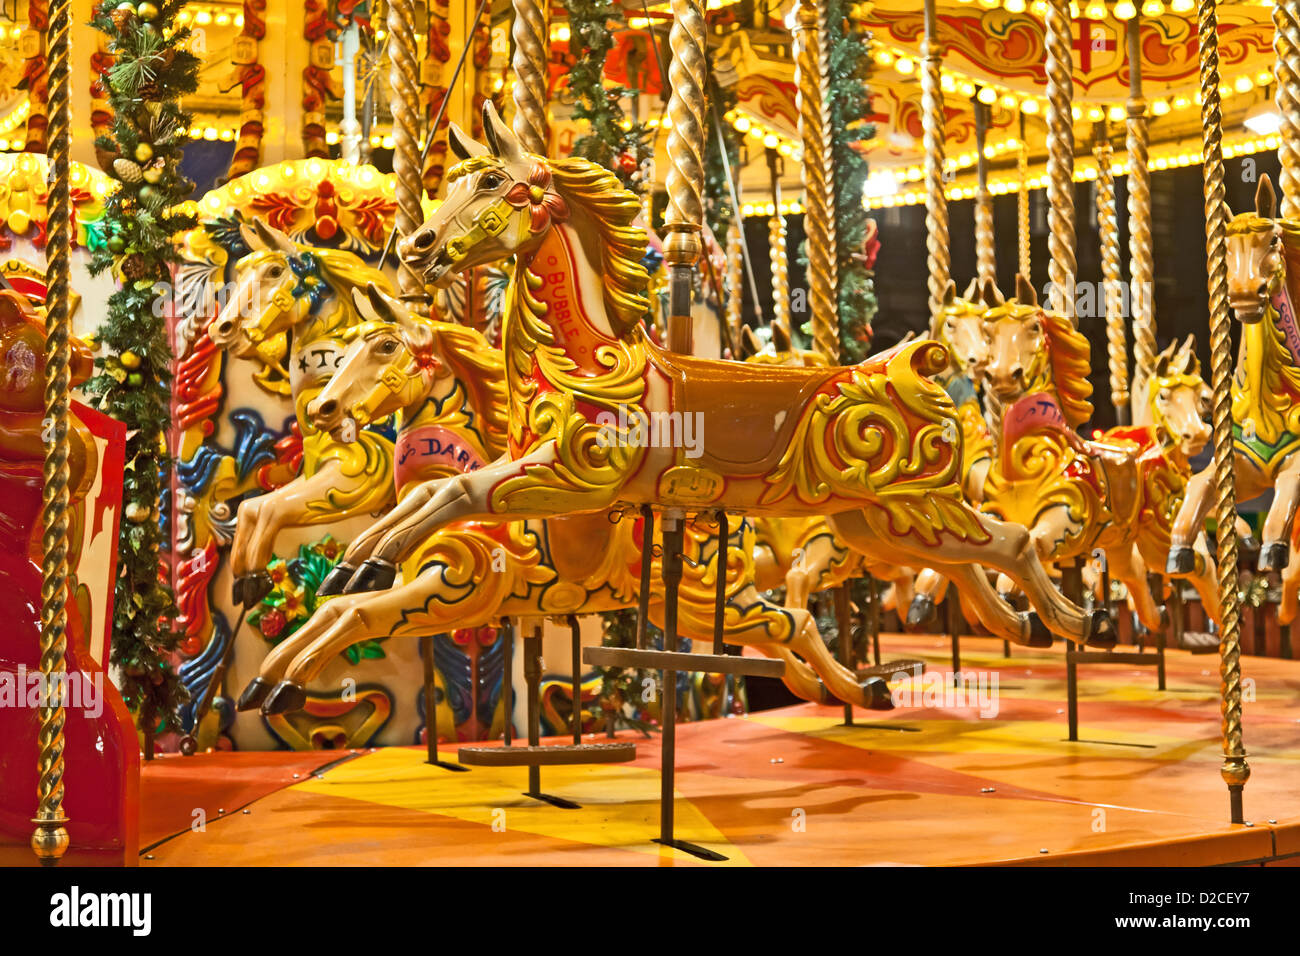 Carousel horses lit up at night in George Square, central Glasgow, Scotland Stock Photo